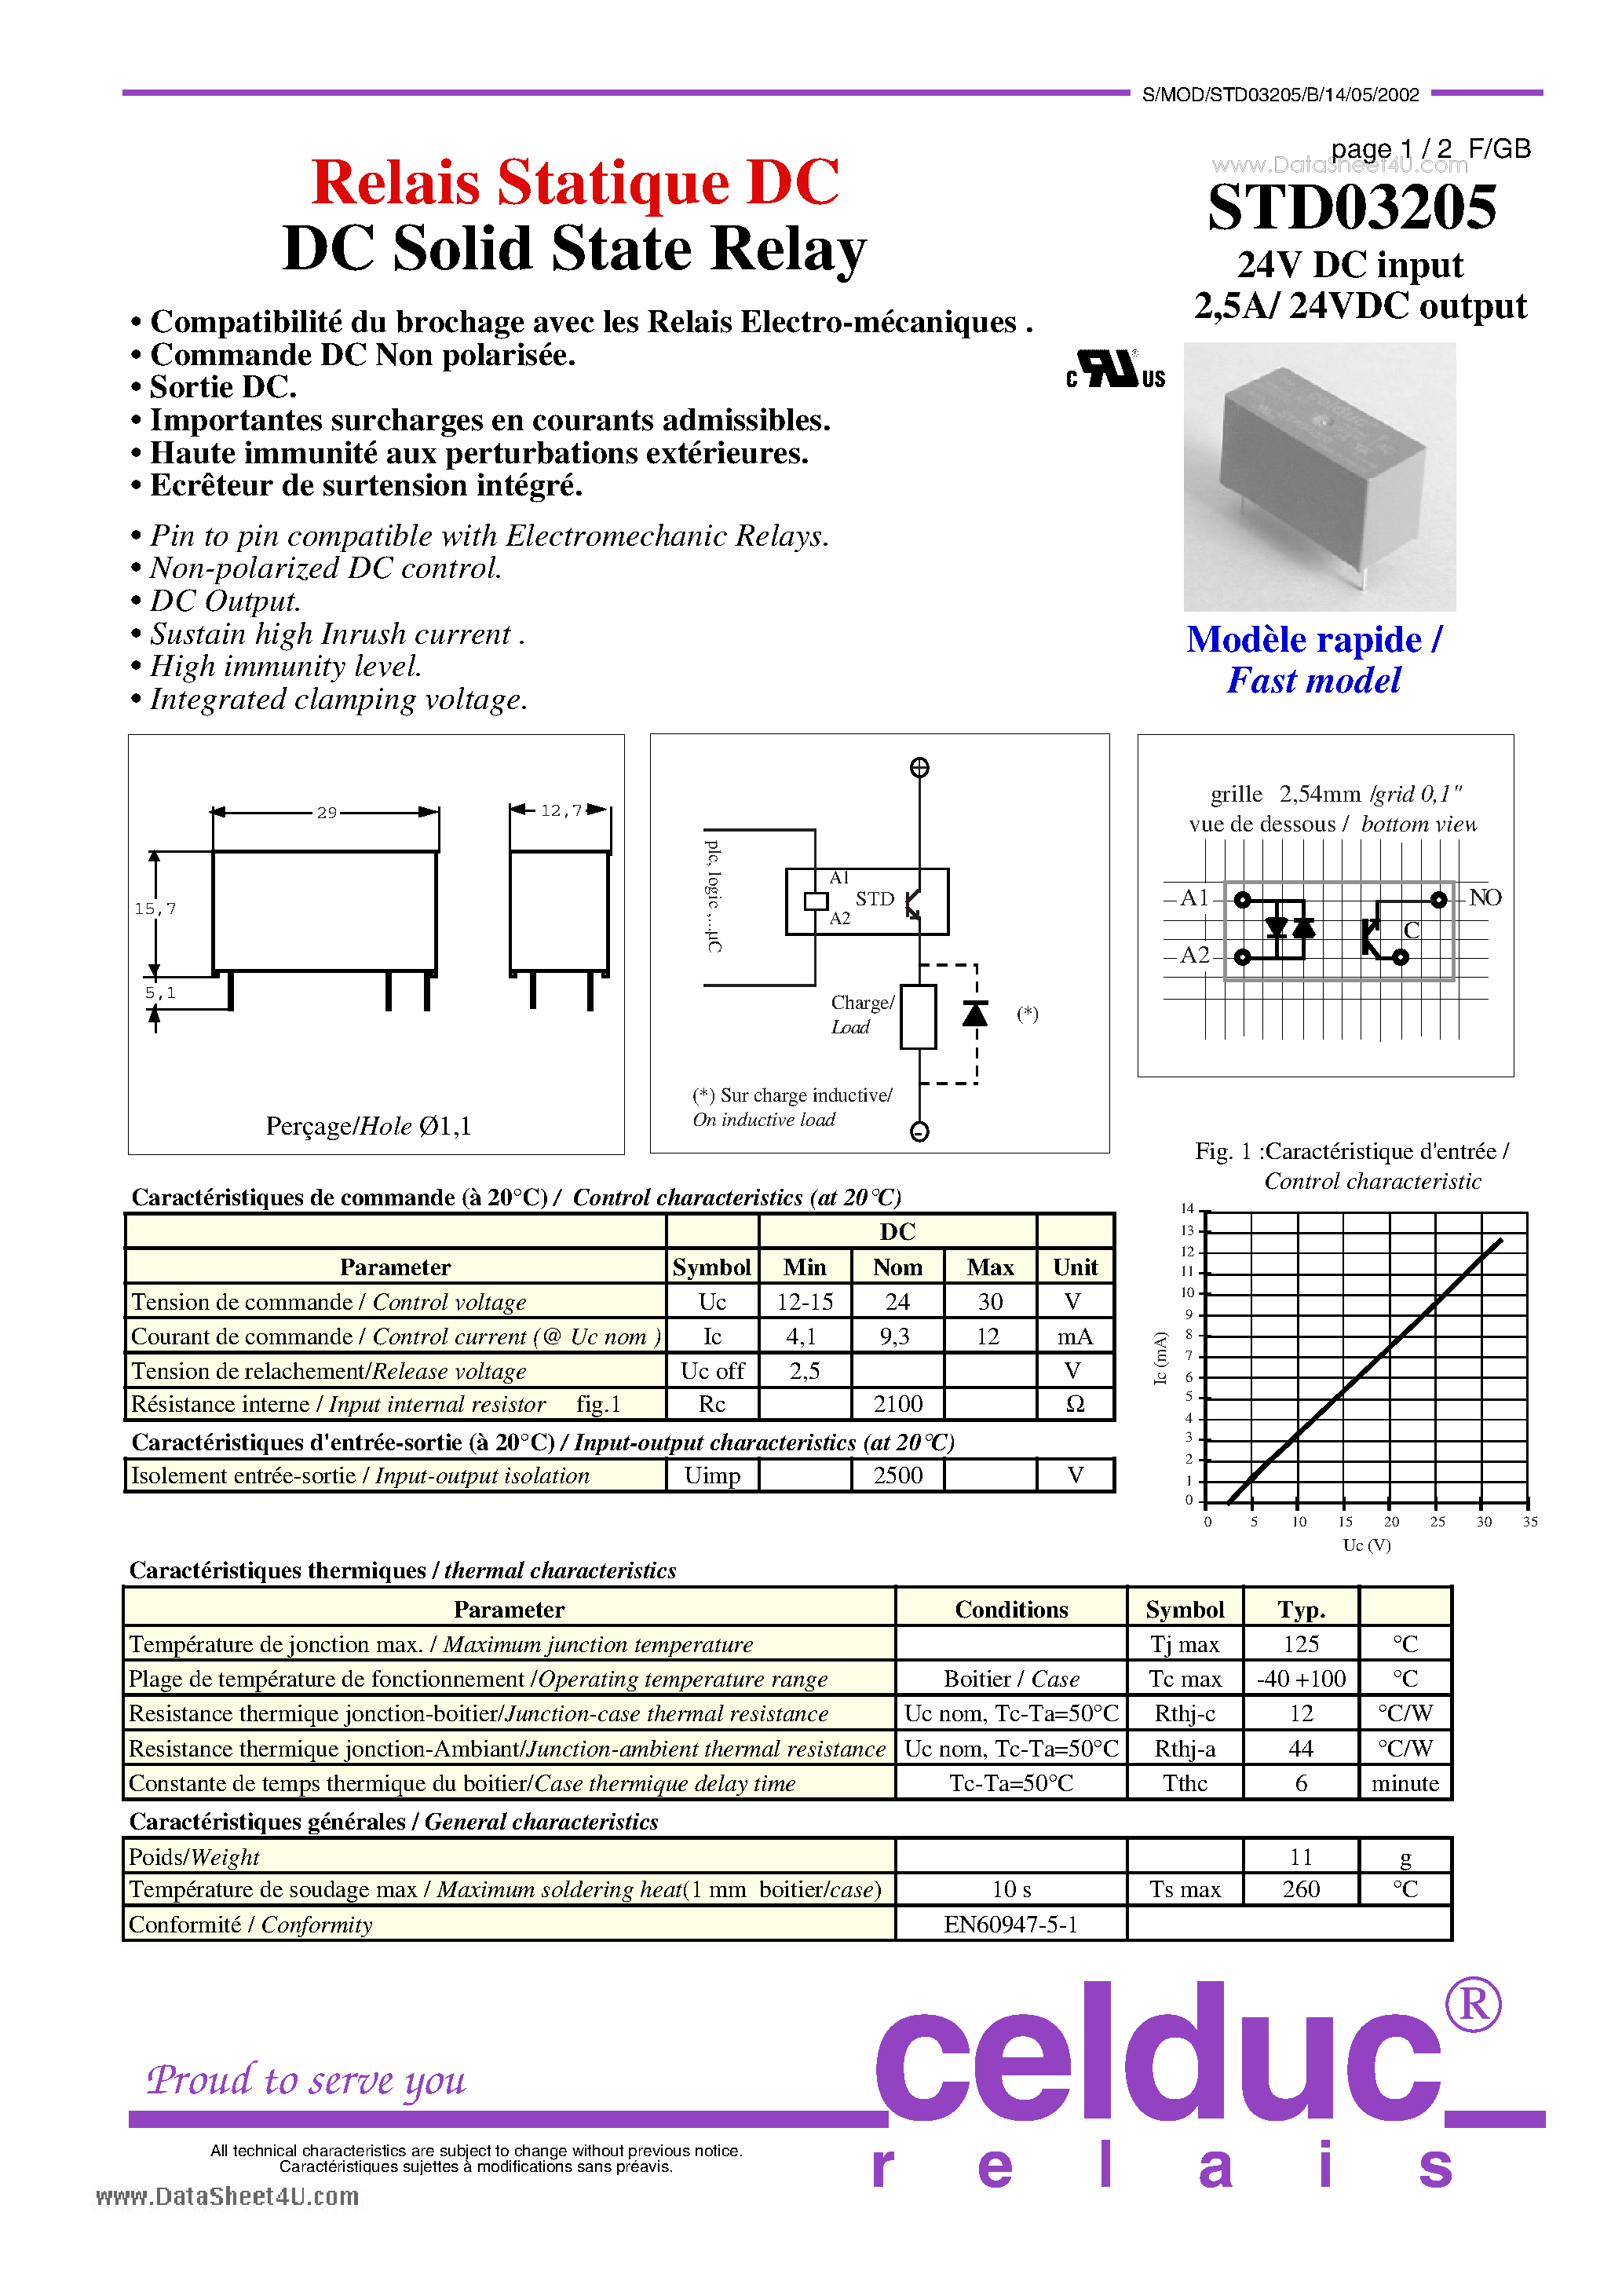 Datasheet STD03205 - DC Solid State Relay page 1